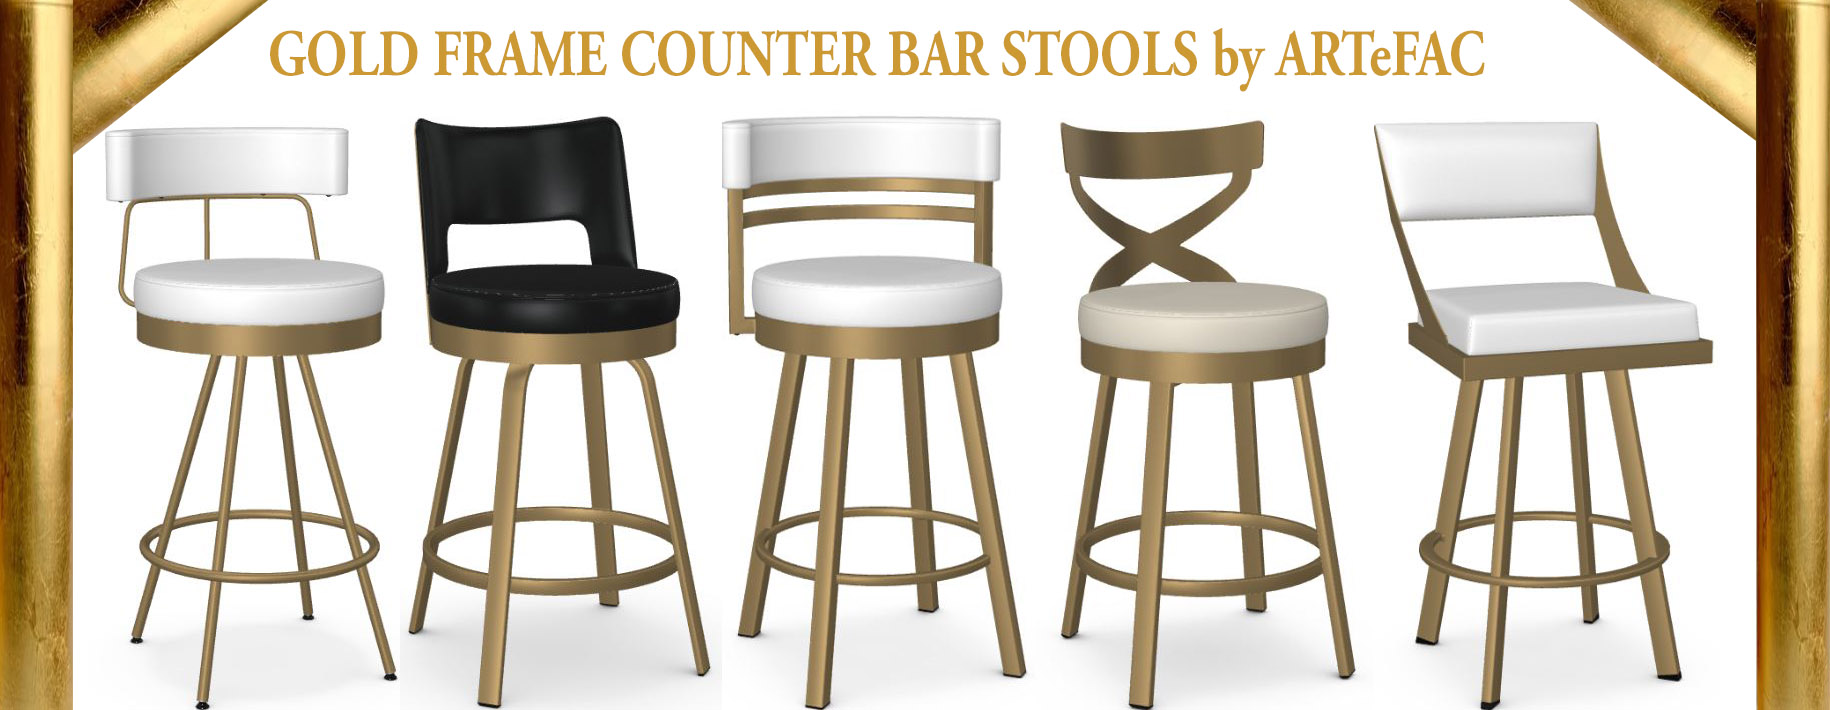 Chairs Bar Stools In Usa Artefac, White Leather Barstools With Gold Legs